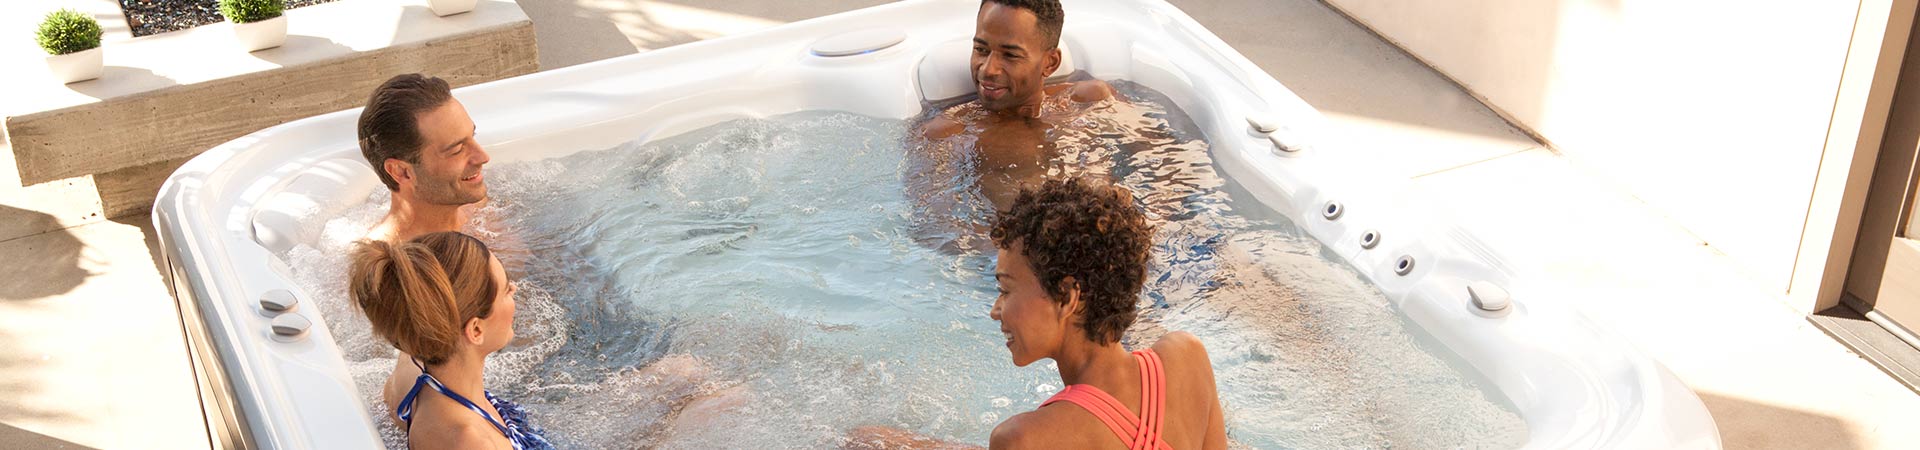 Are Hot Tubs a Good Investment?